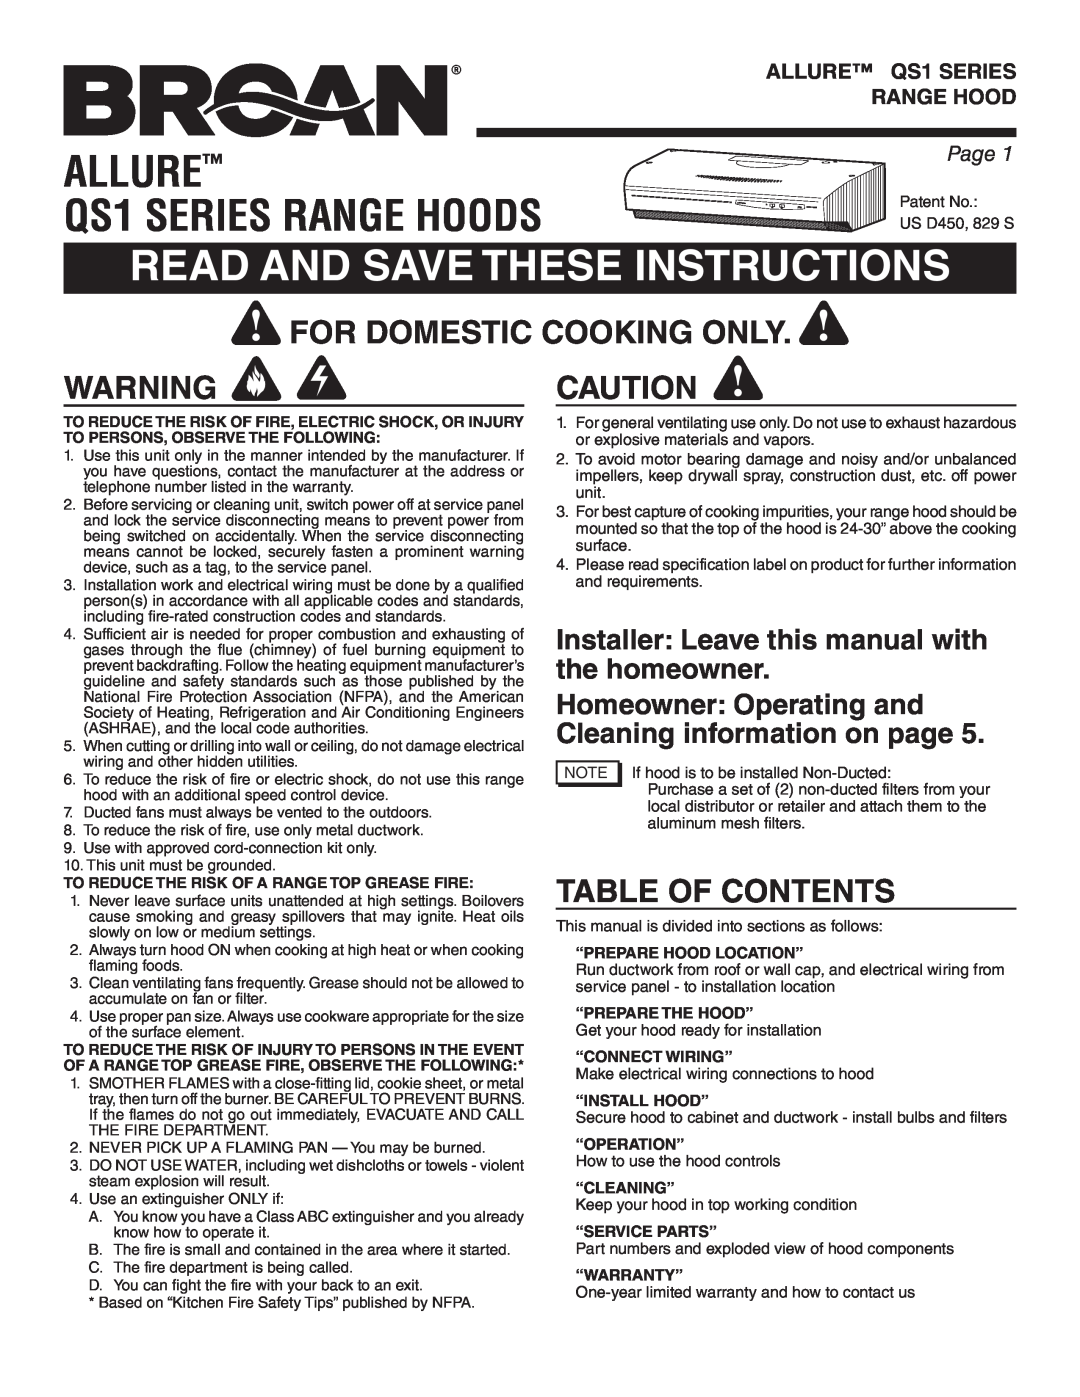 Broan QS136SS manual Allure, QS1 SERIES RANGE HOODS, Read And Save These Instructions, For Domestic Cooking Only, Page 